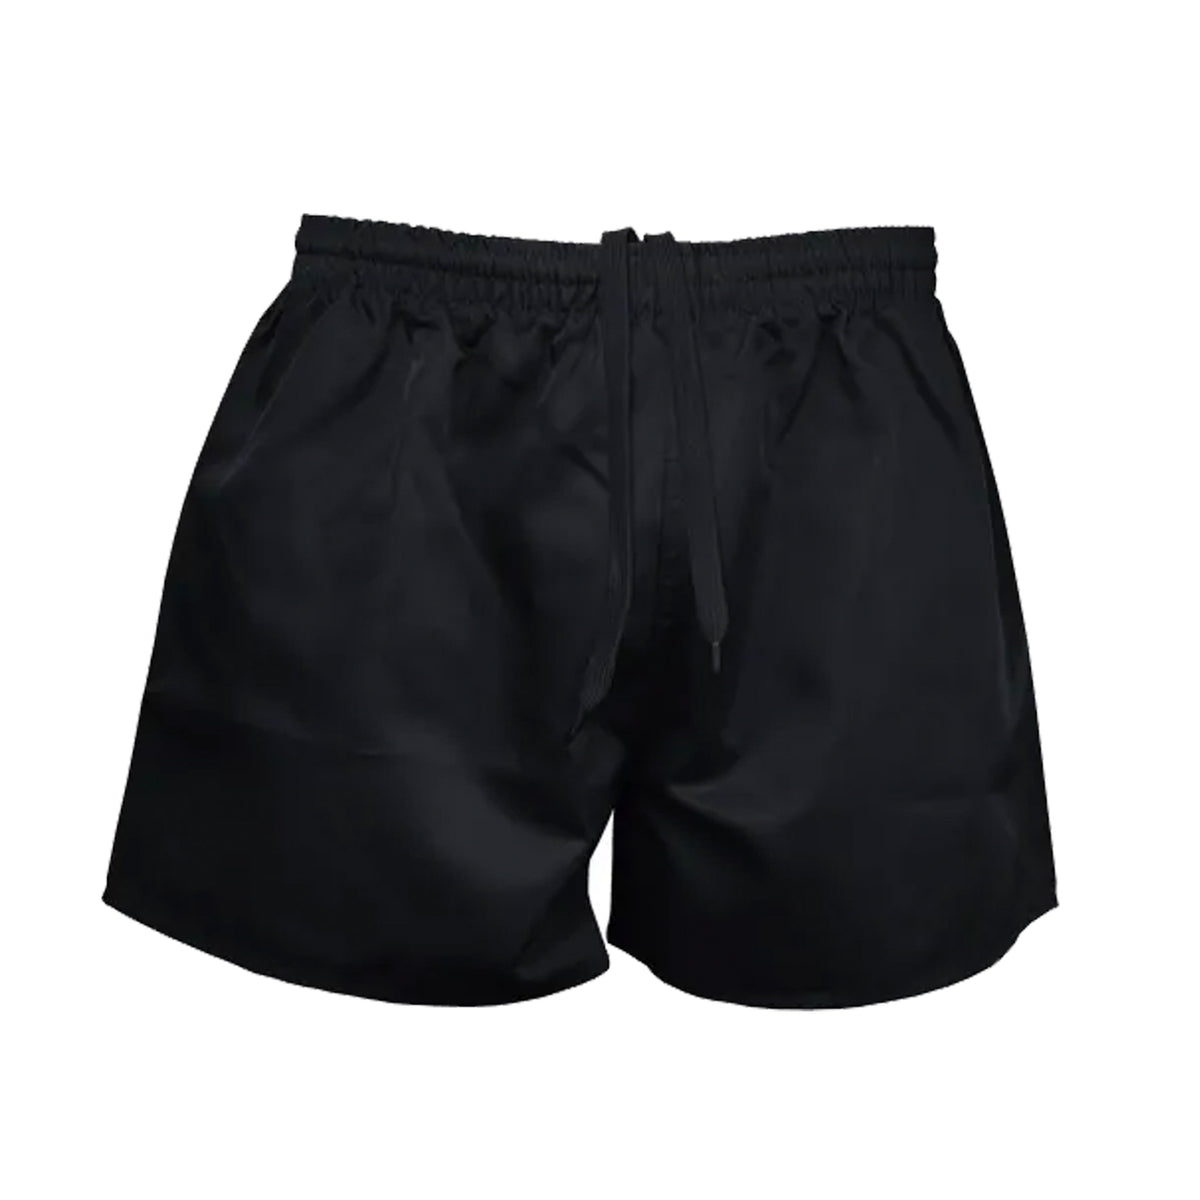 aussie pacific rugby mens shorts in black